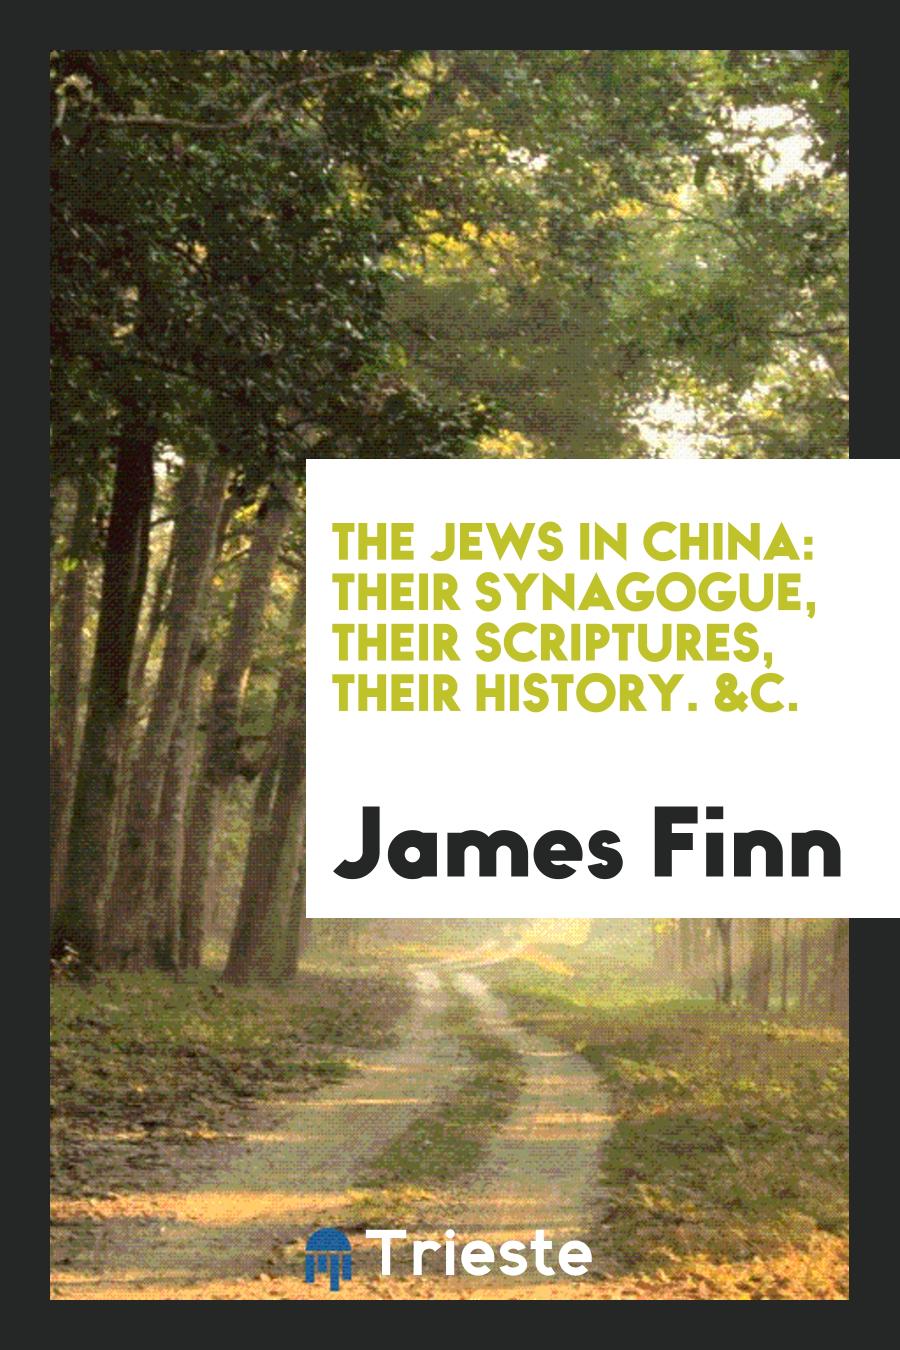 The Jews in China: Their Synagogue, Their Scriptures, Their History. &c.